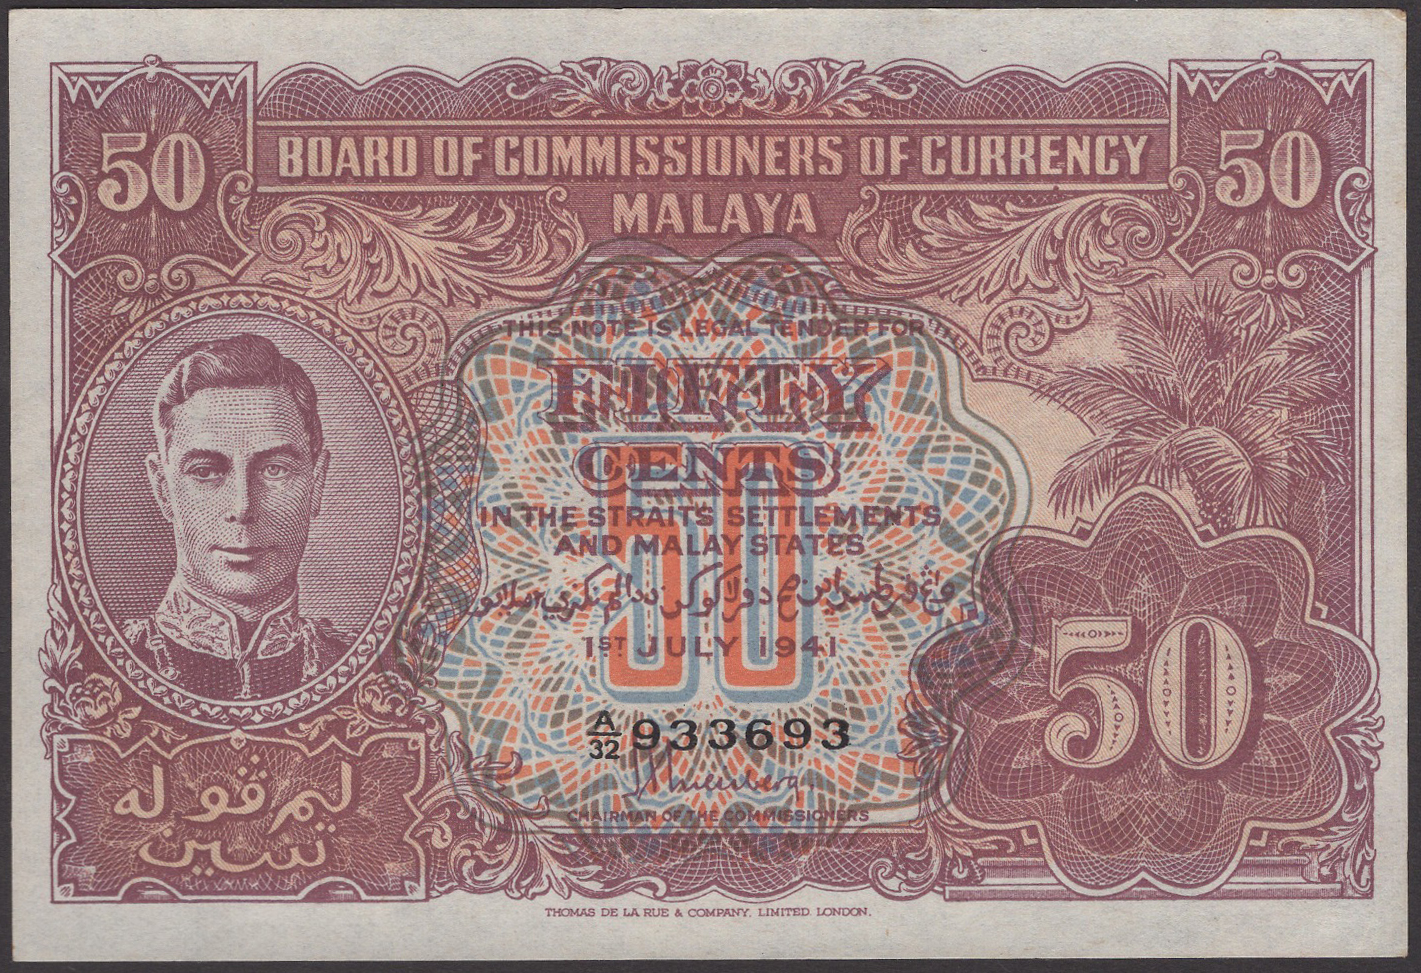 Board of Commissioners of Currency Malaya, 50 Cents, 1 July 1941, serial number A/32...